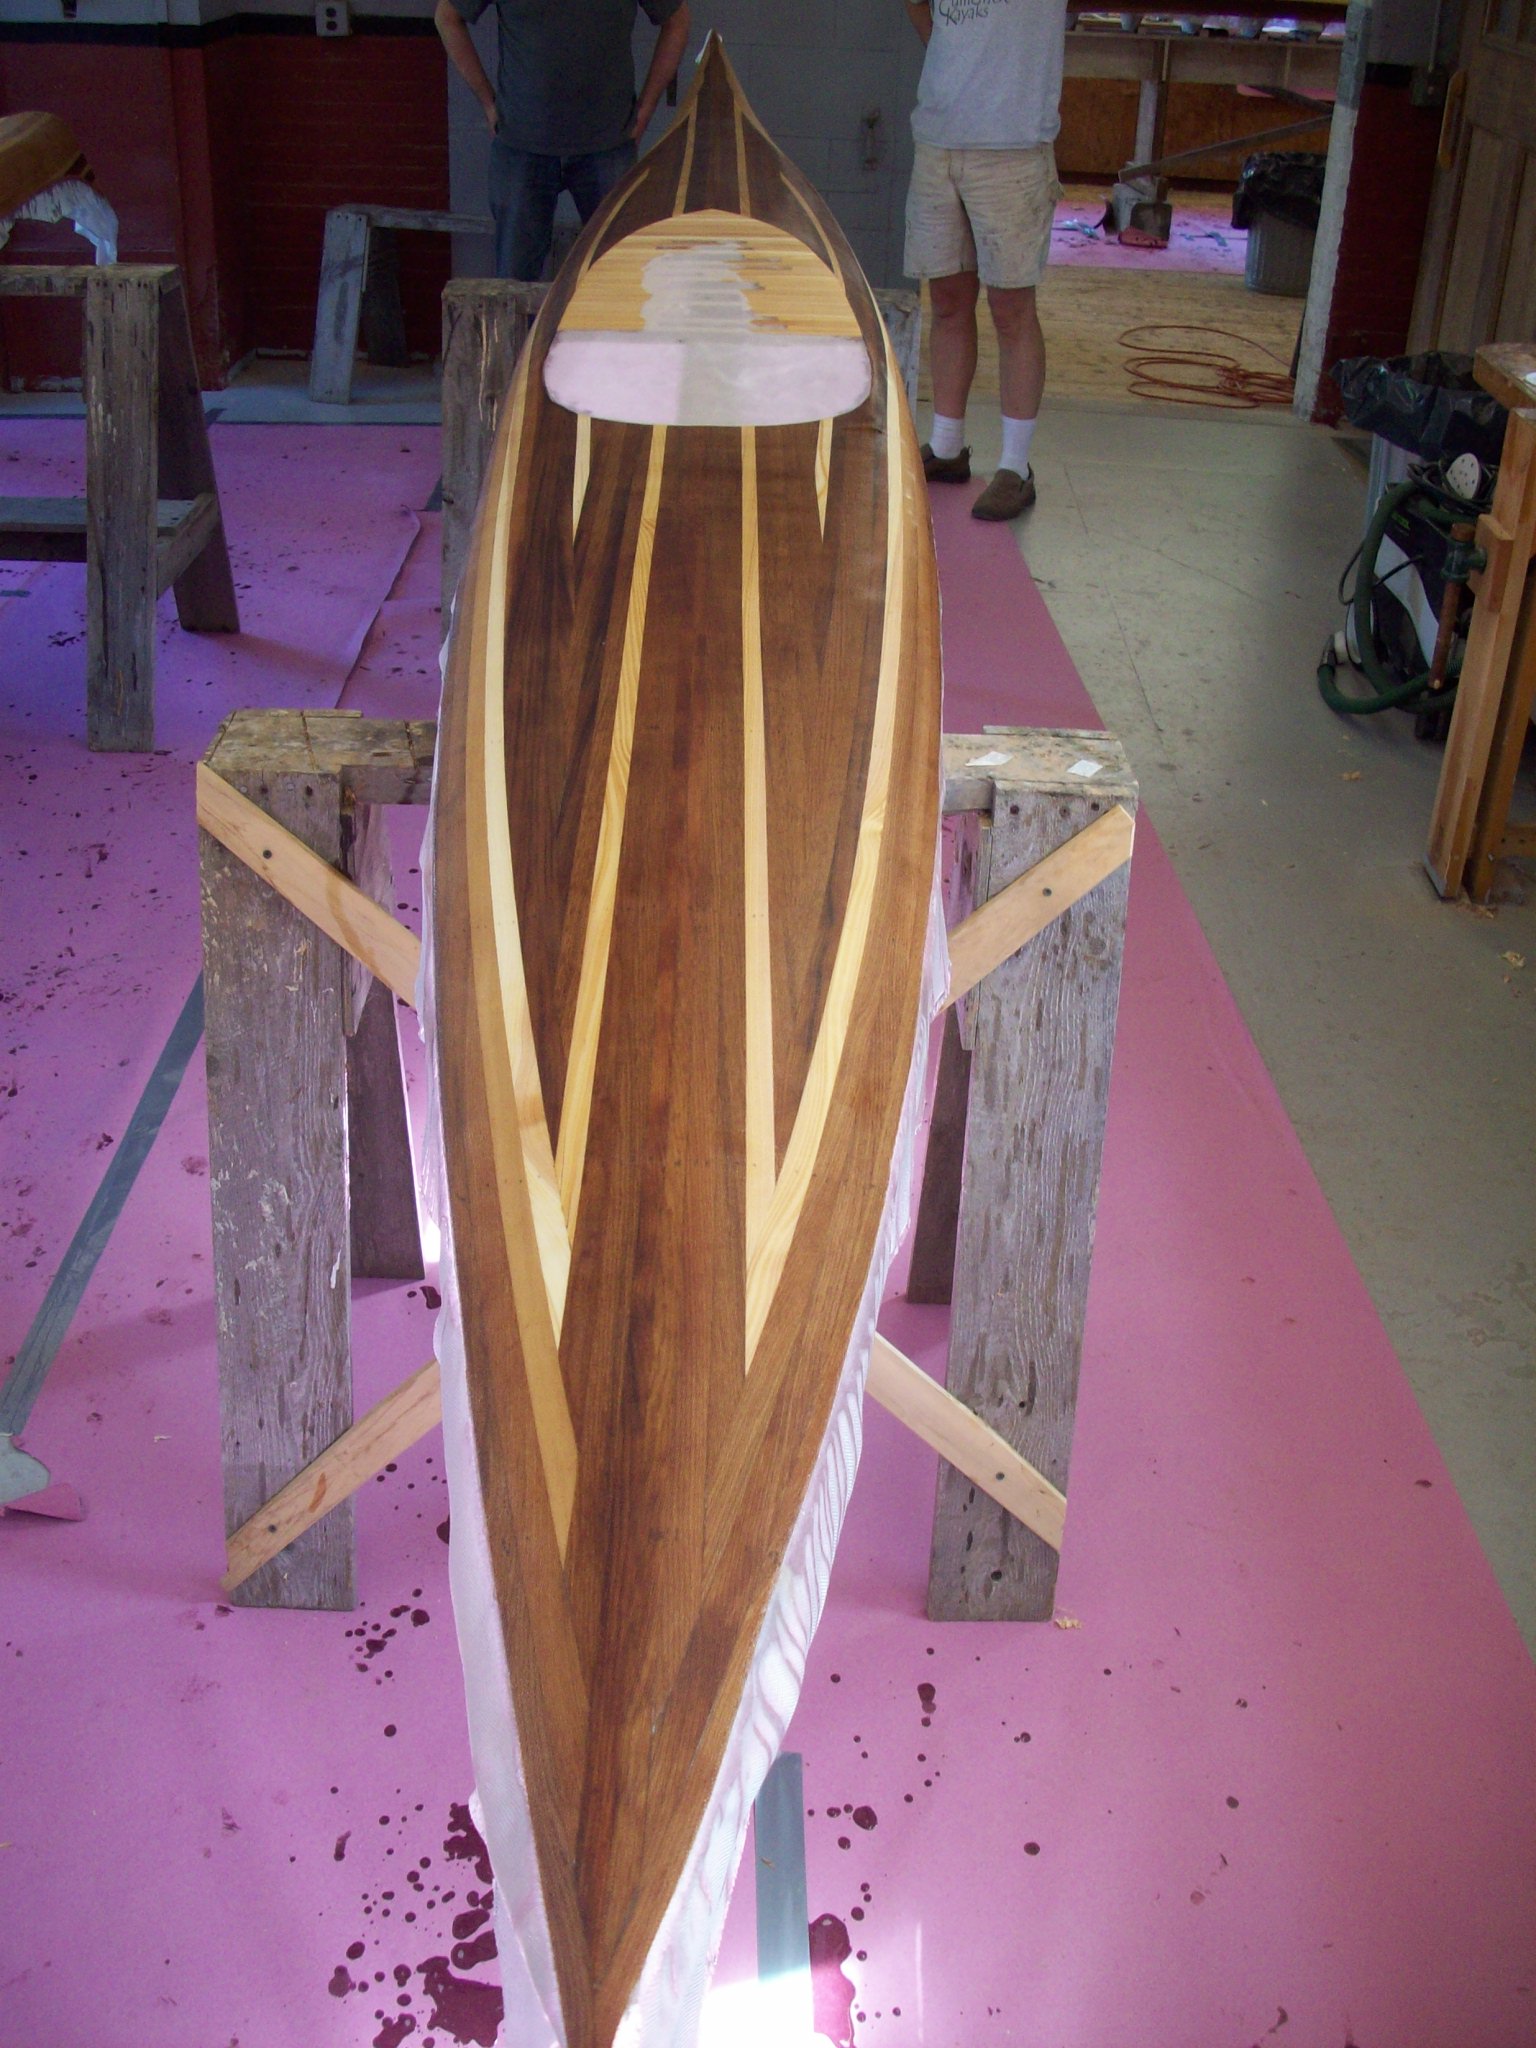 The completed top of the kayak